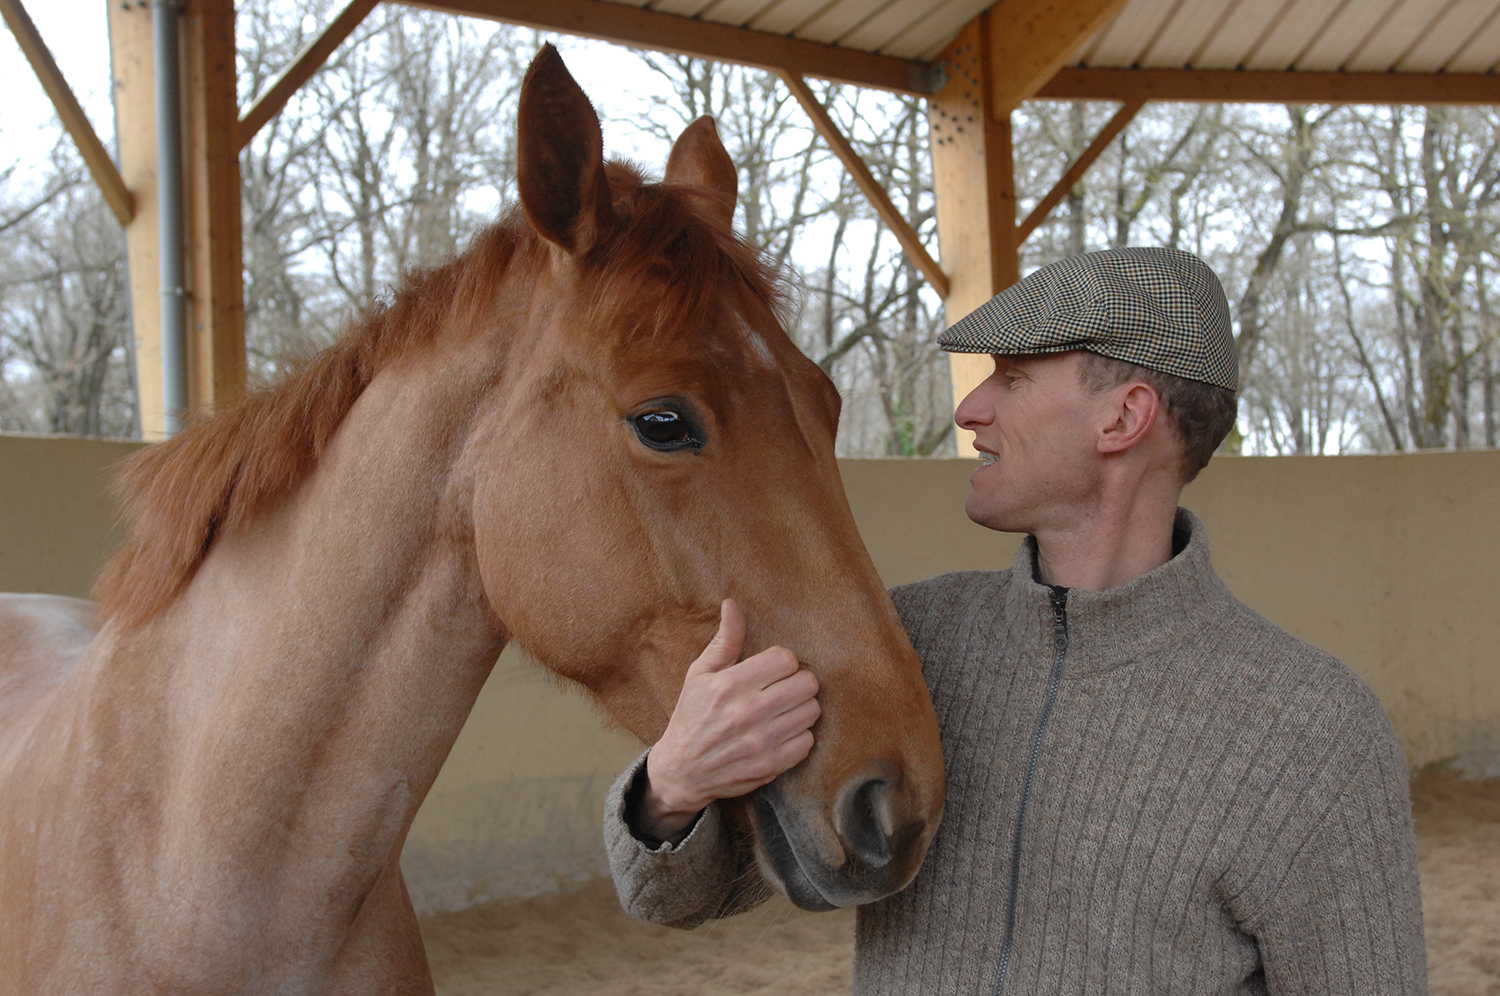 Interspecific social cognition in horses in their relationship with humans